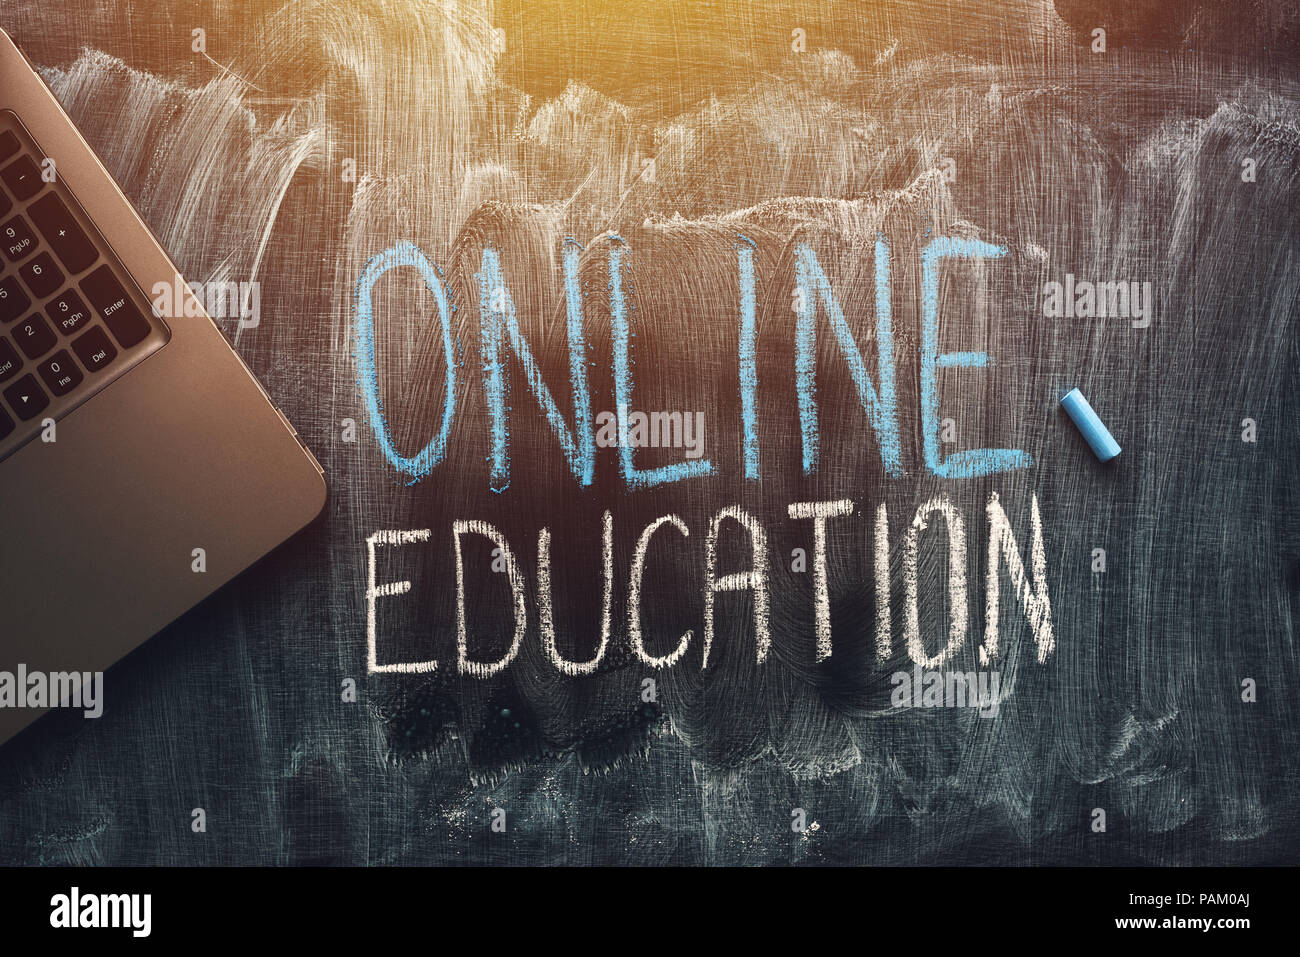 Online education concept with laptop computer over dirty blackboard surface Stock Photo